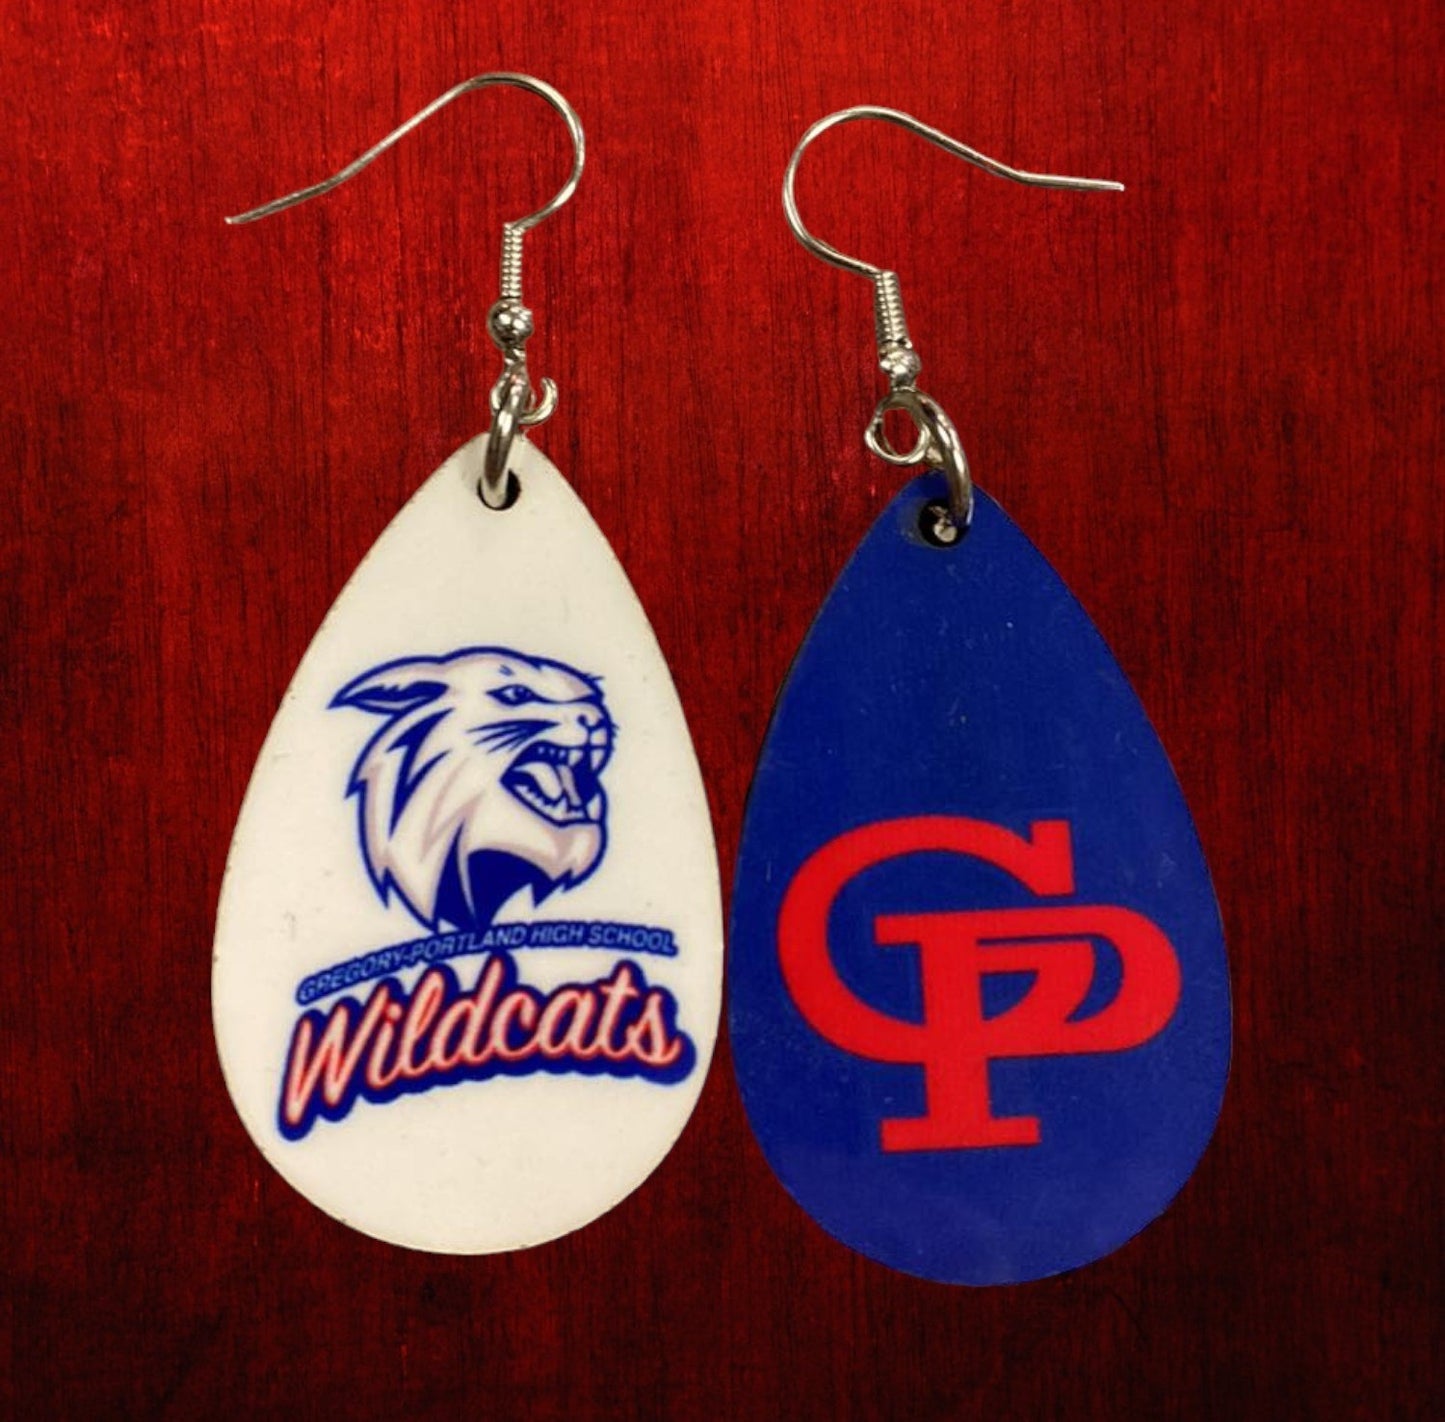 GP Sublimated Earrings